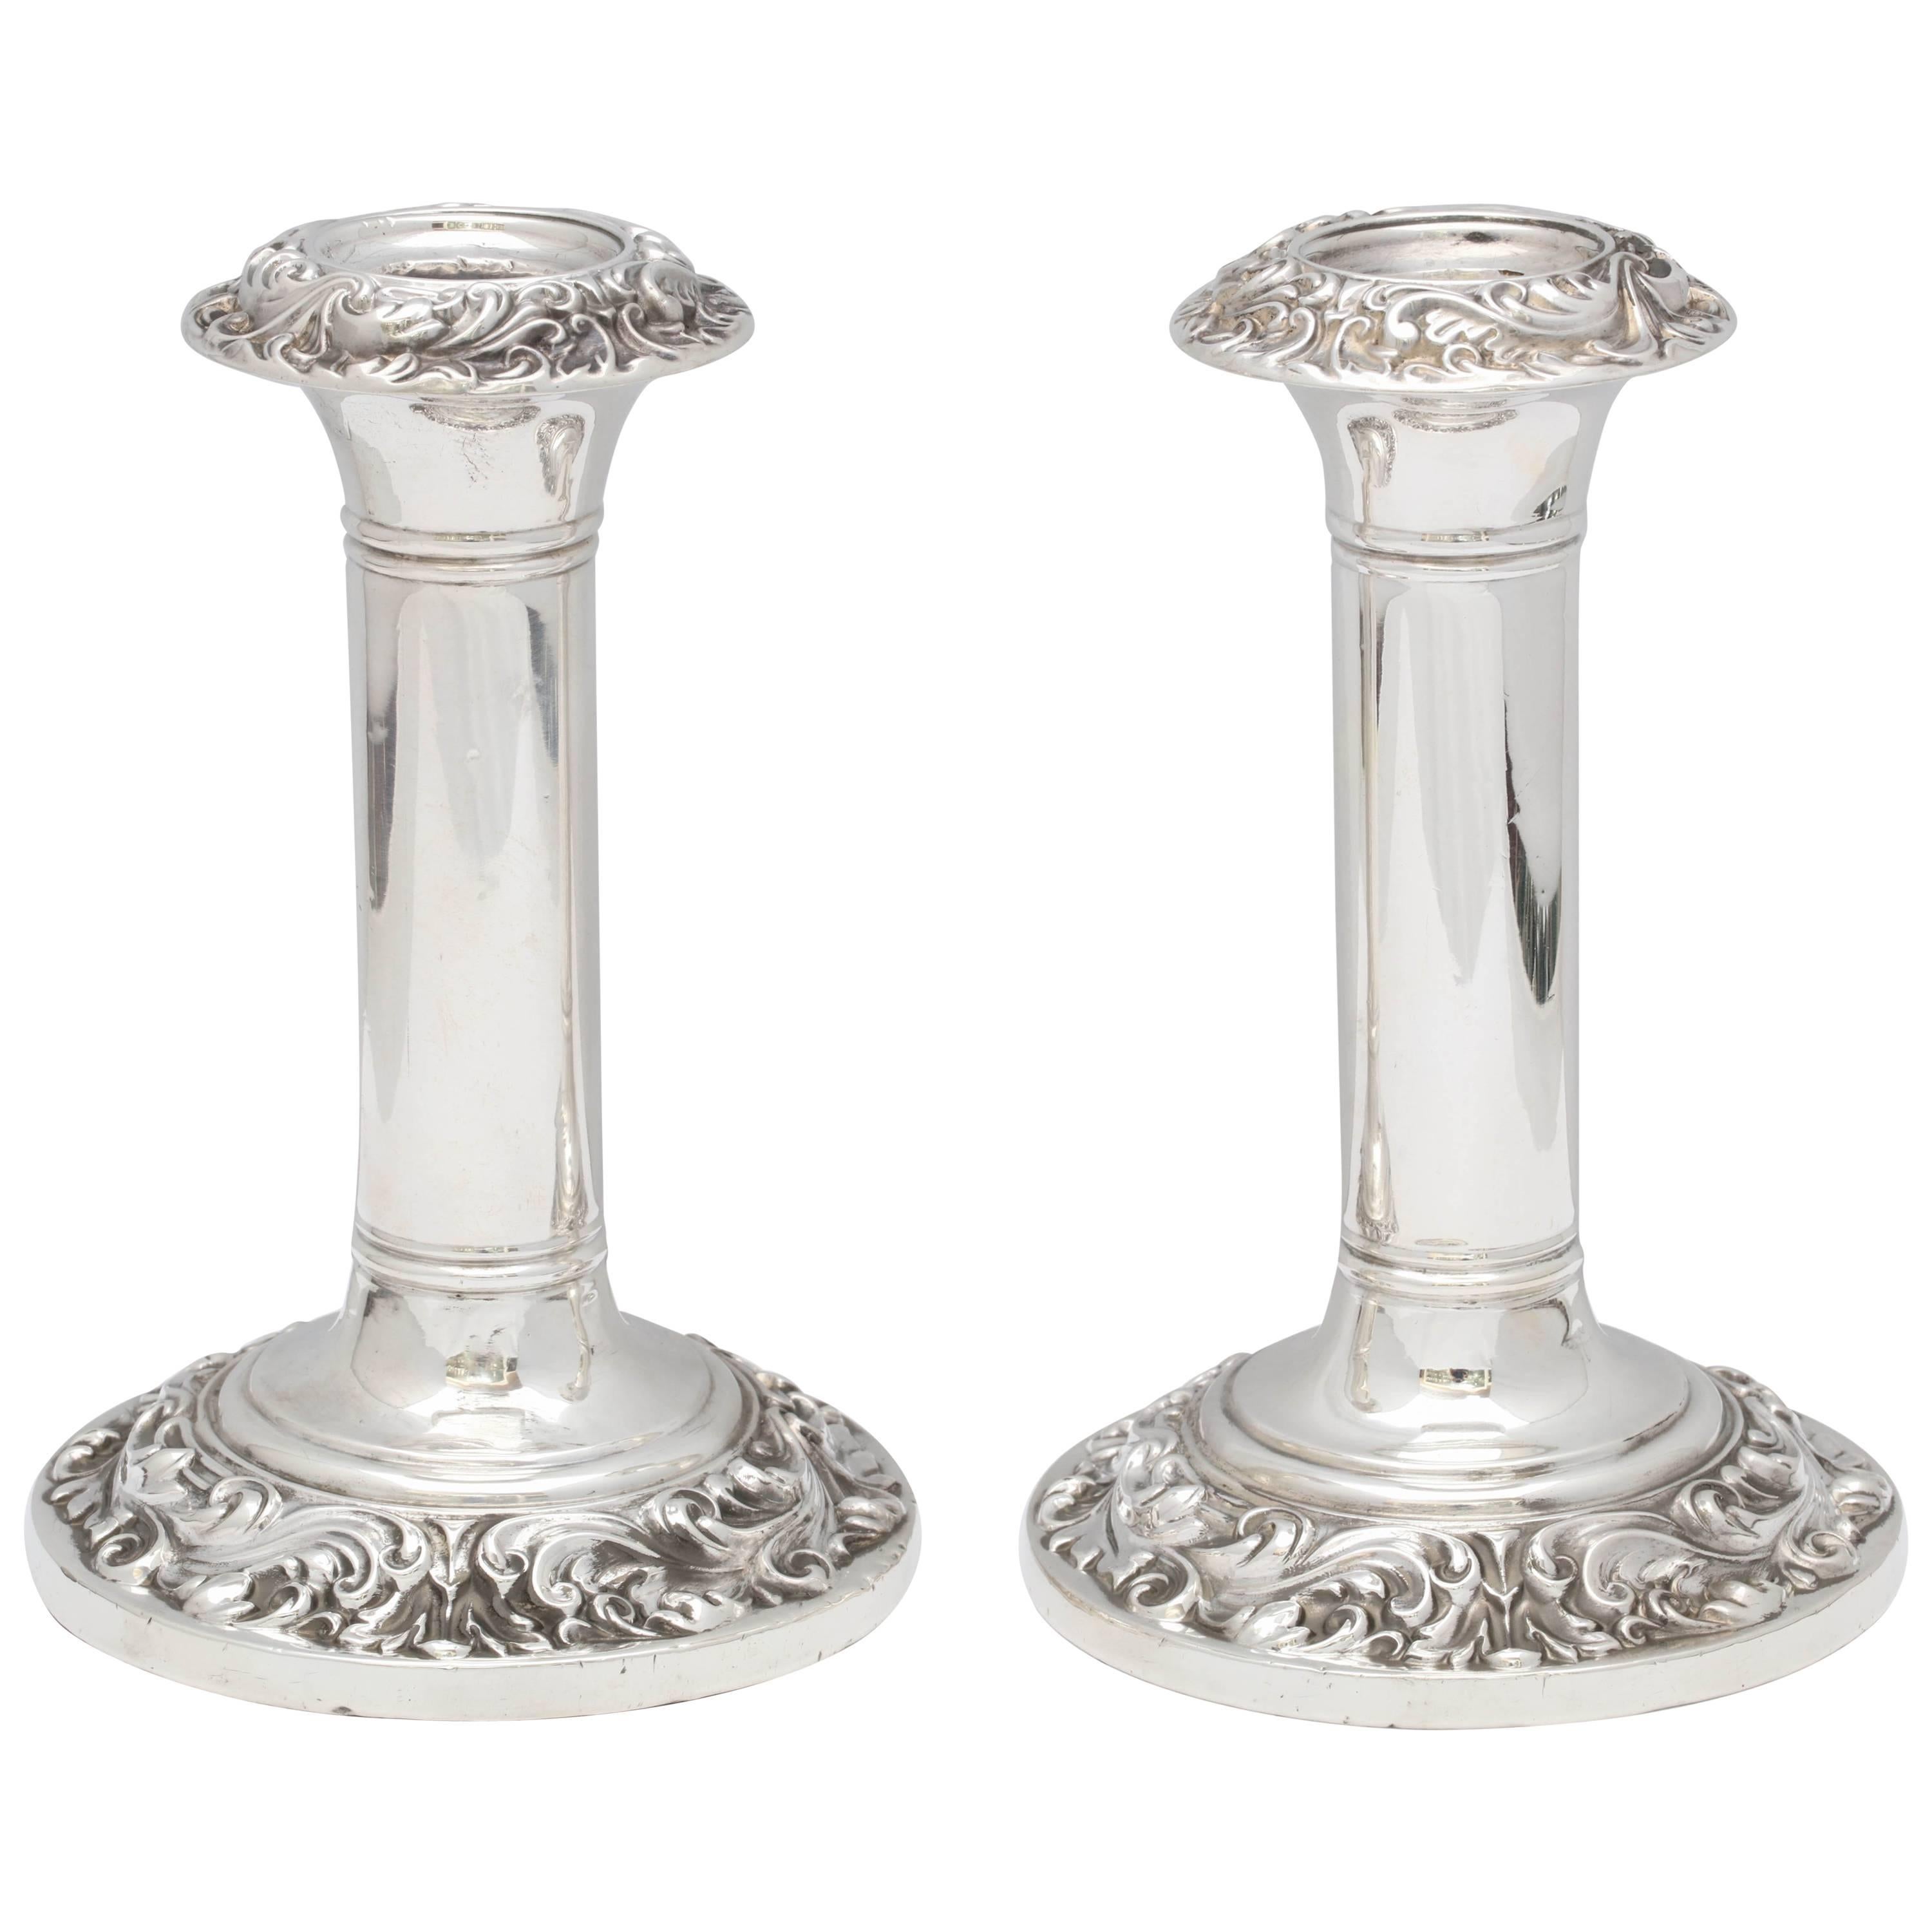 Pair of Edwardian, Sterling Silver Candlesticks